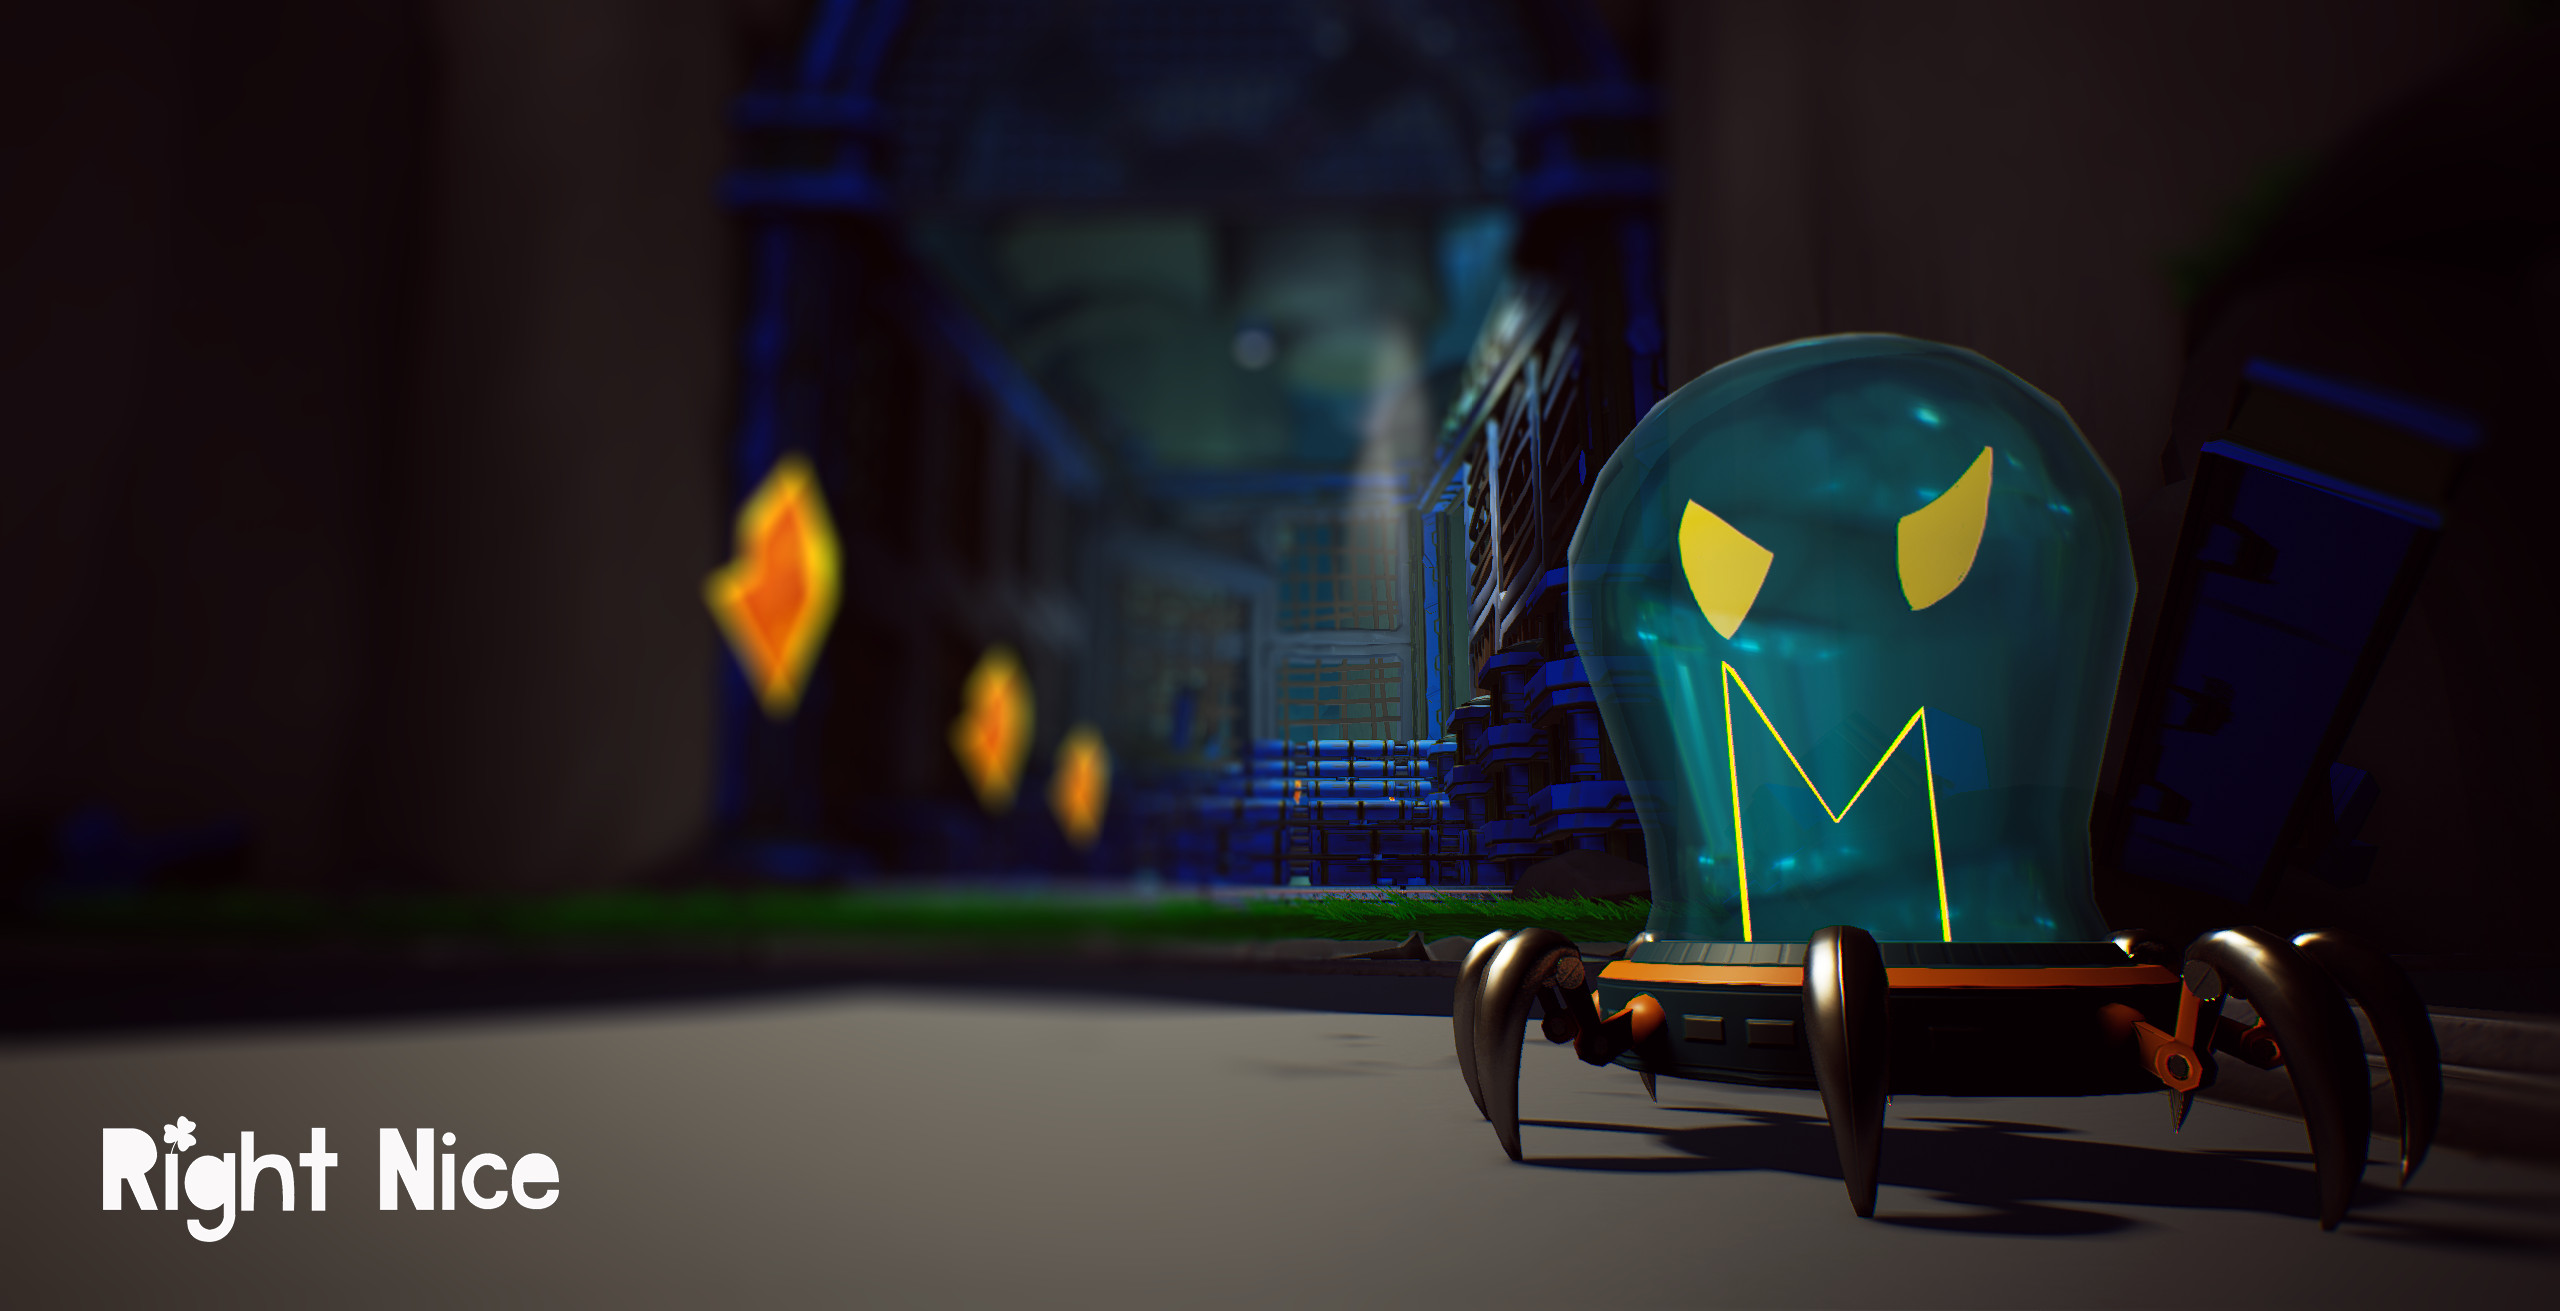 A new enemy I created for the game. The Light bulb Robot!